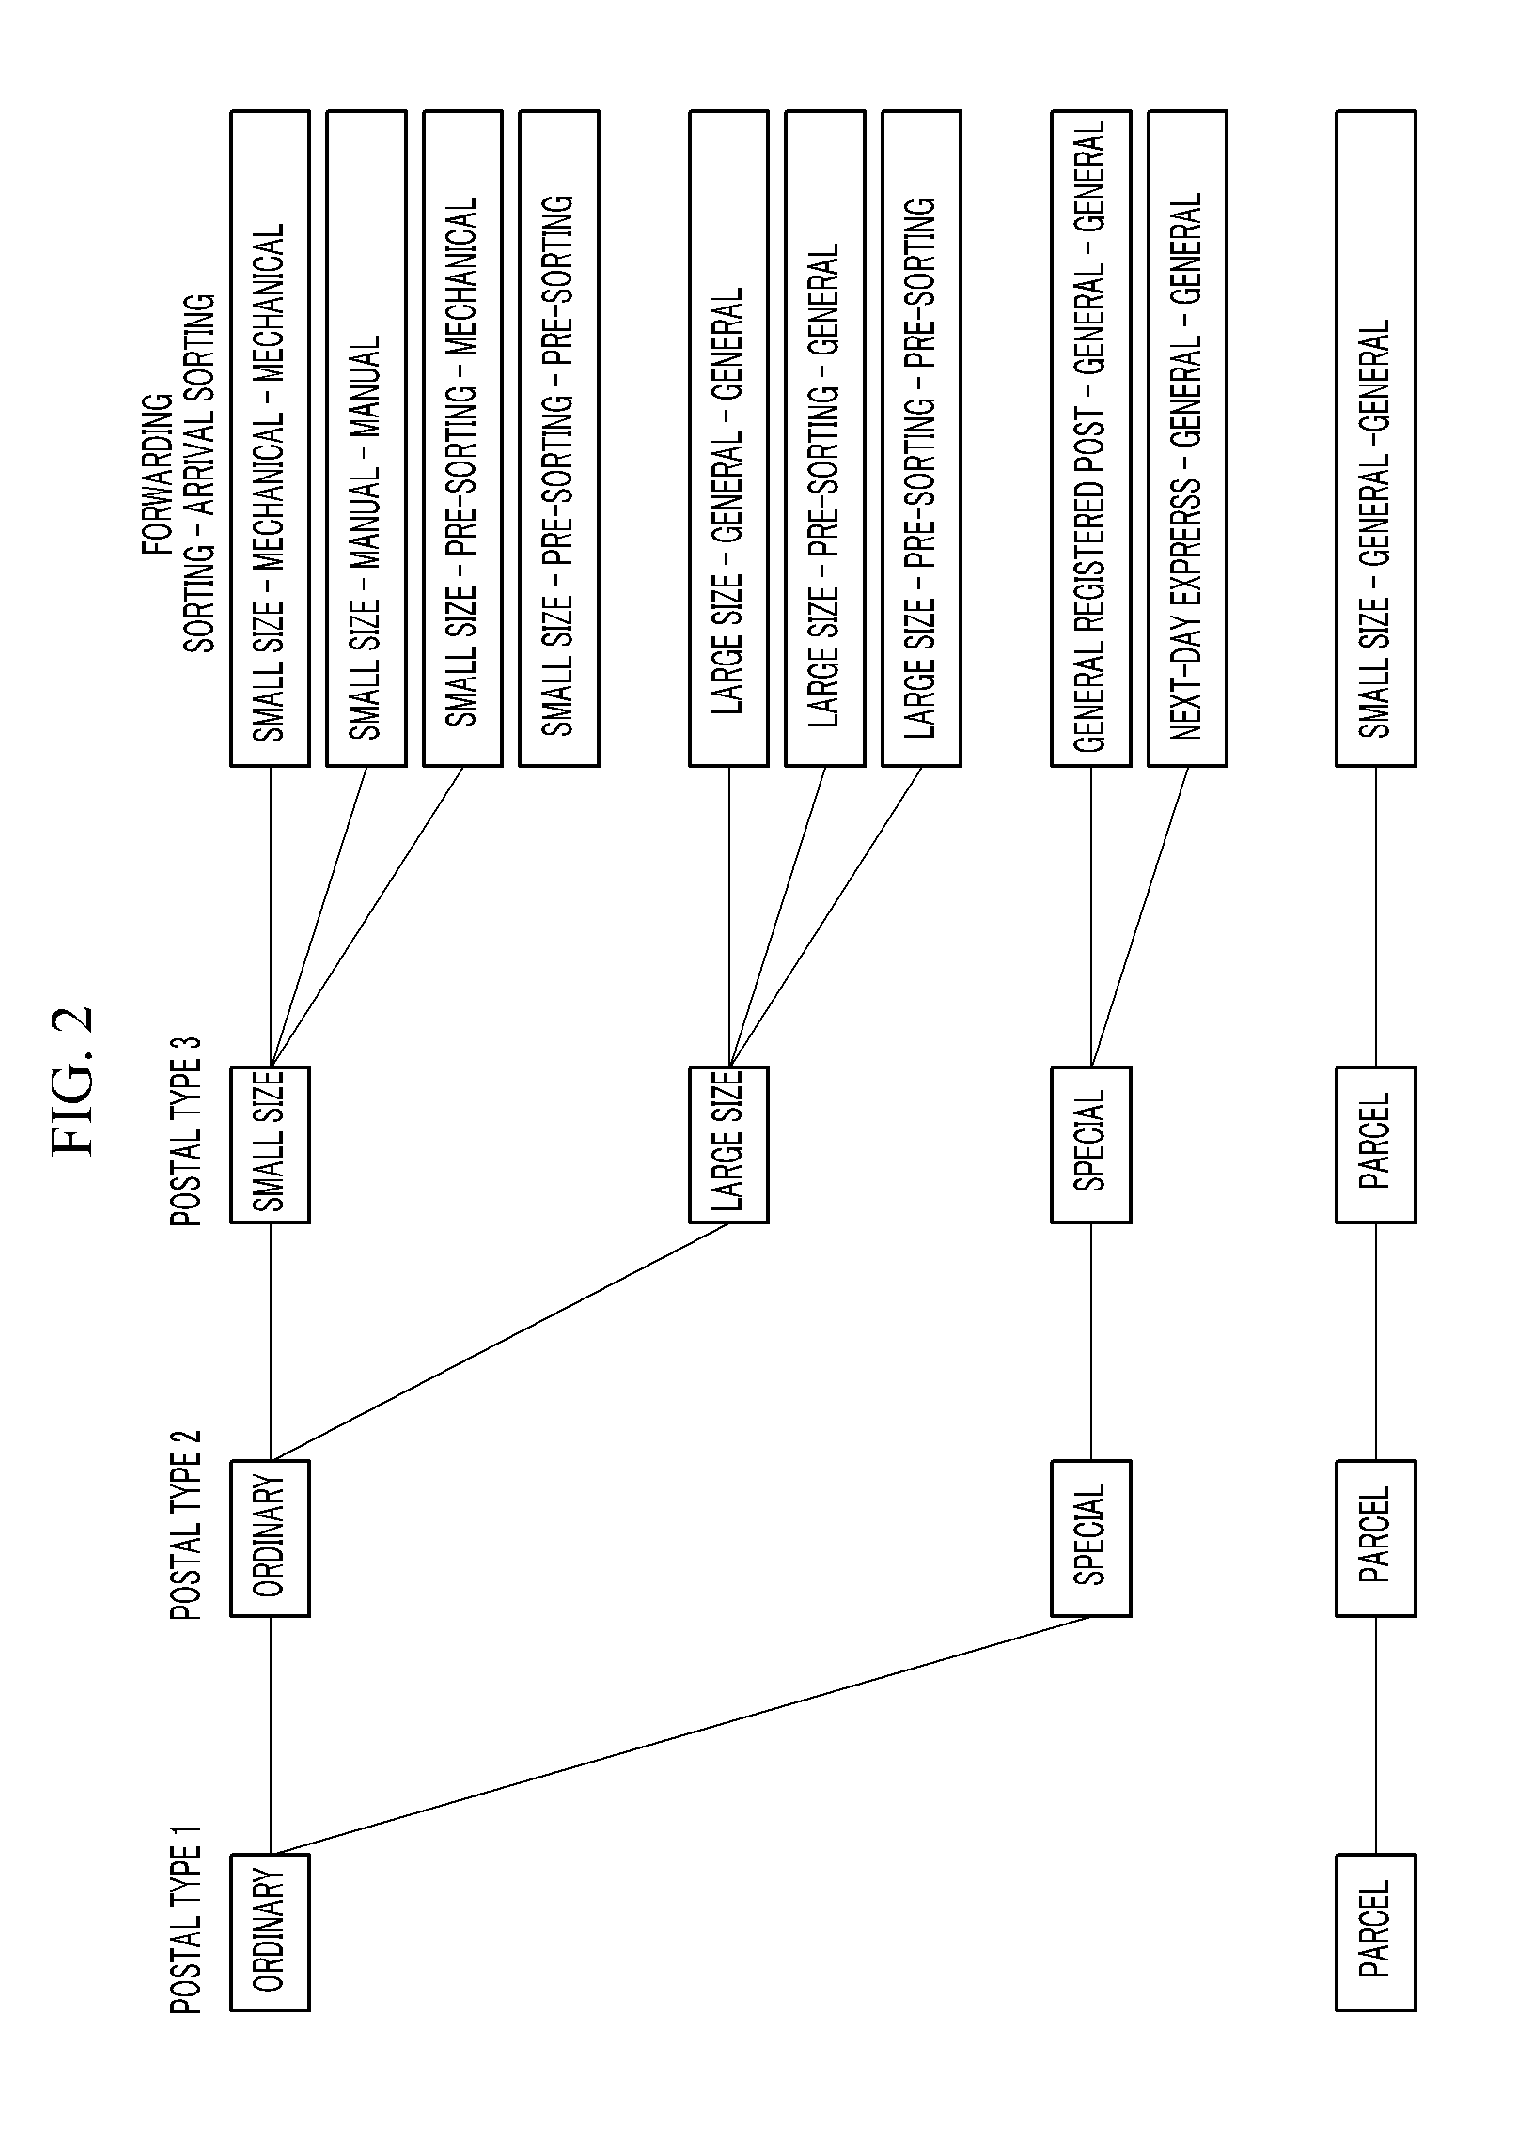 System and method for alternative simulation of logistics infrastructure